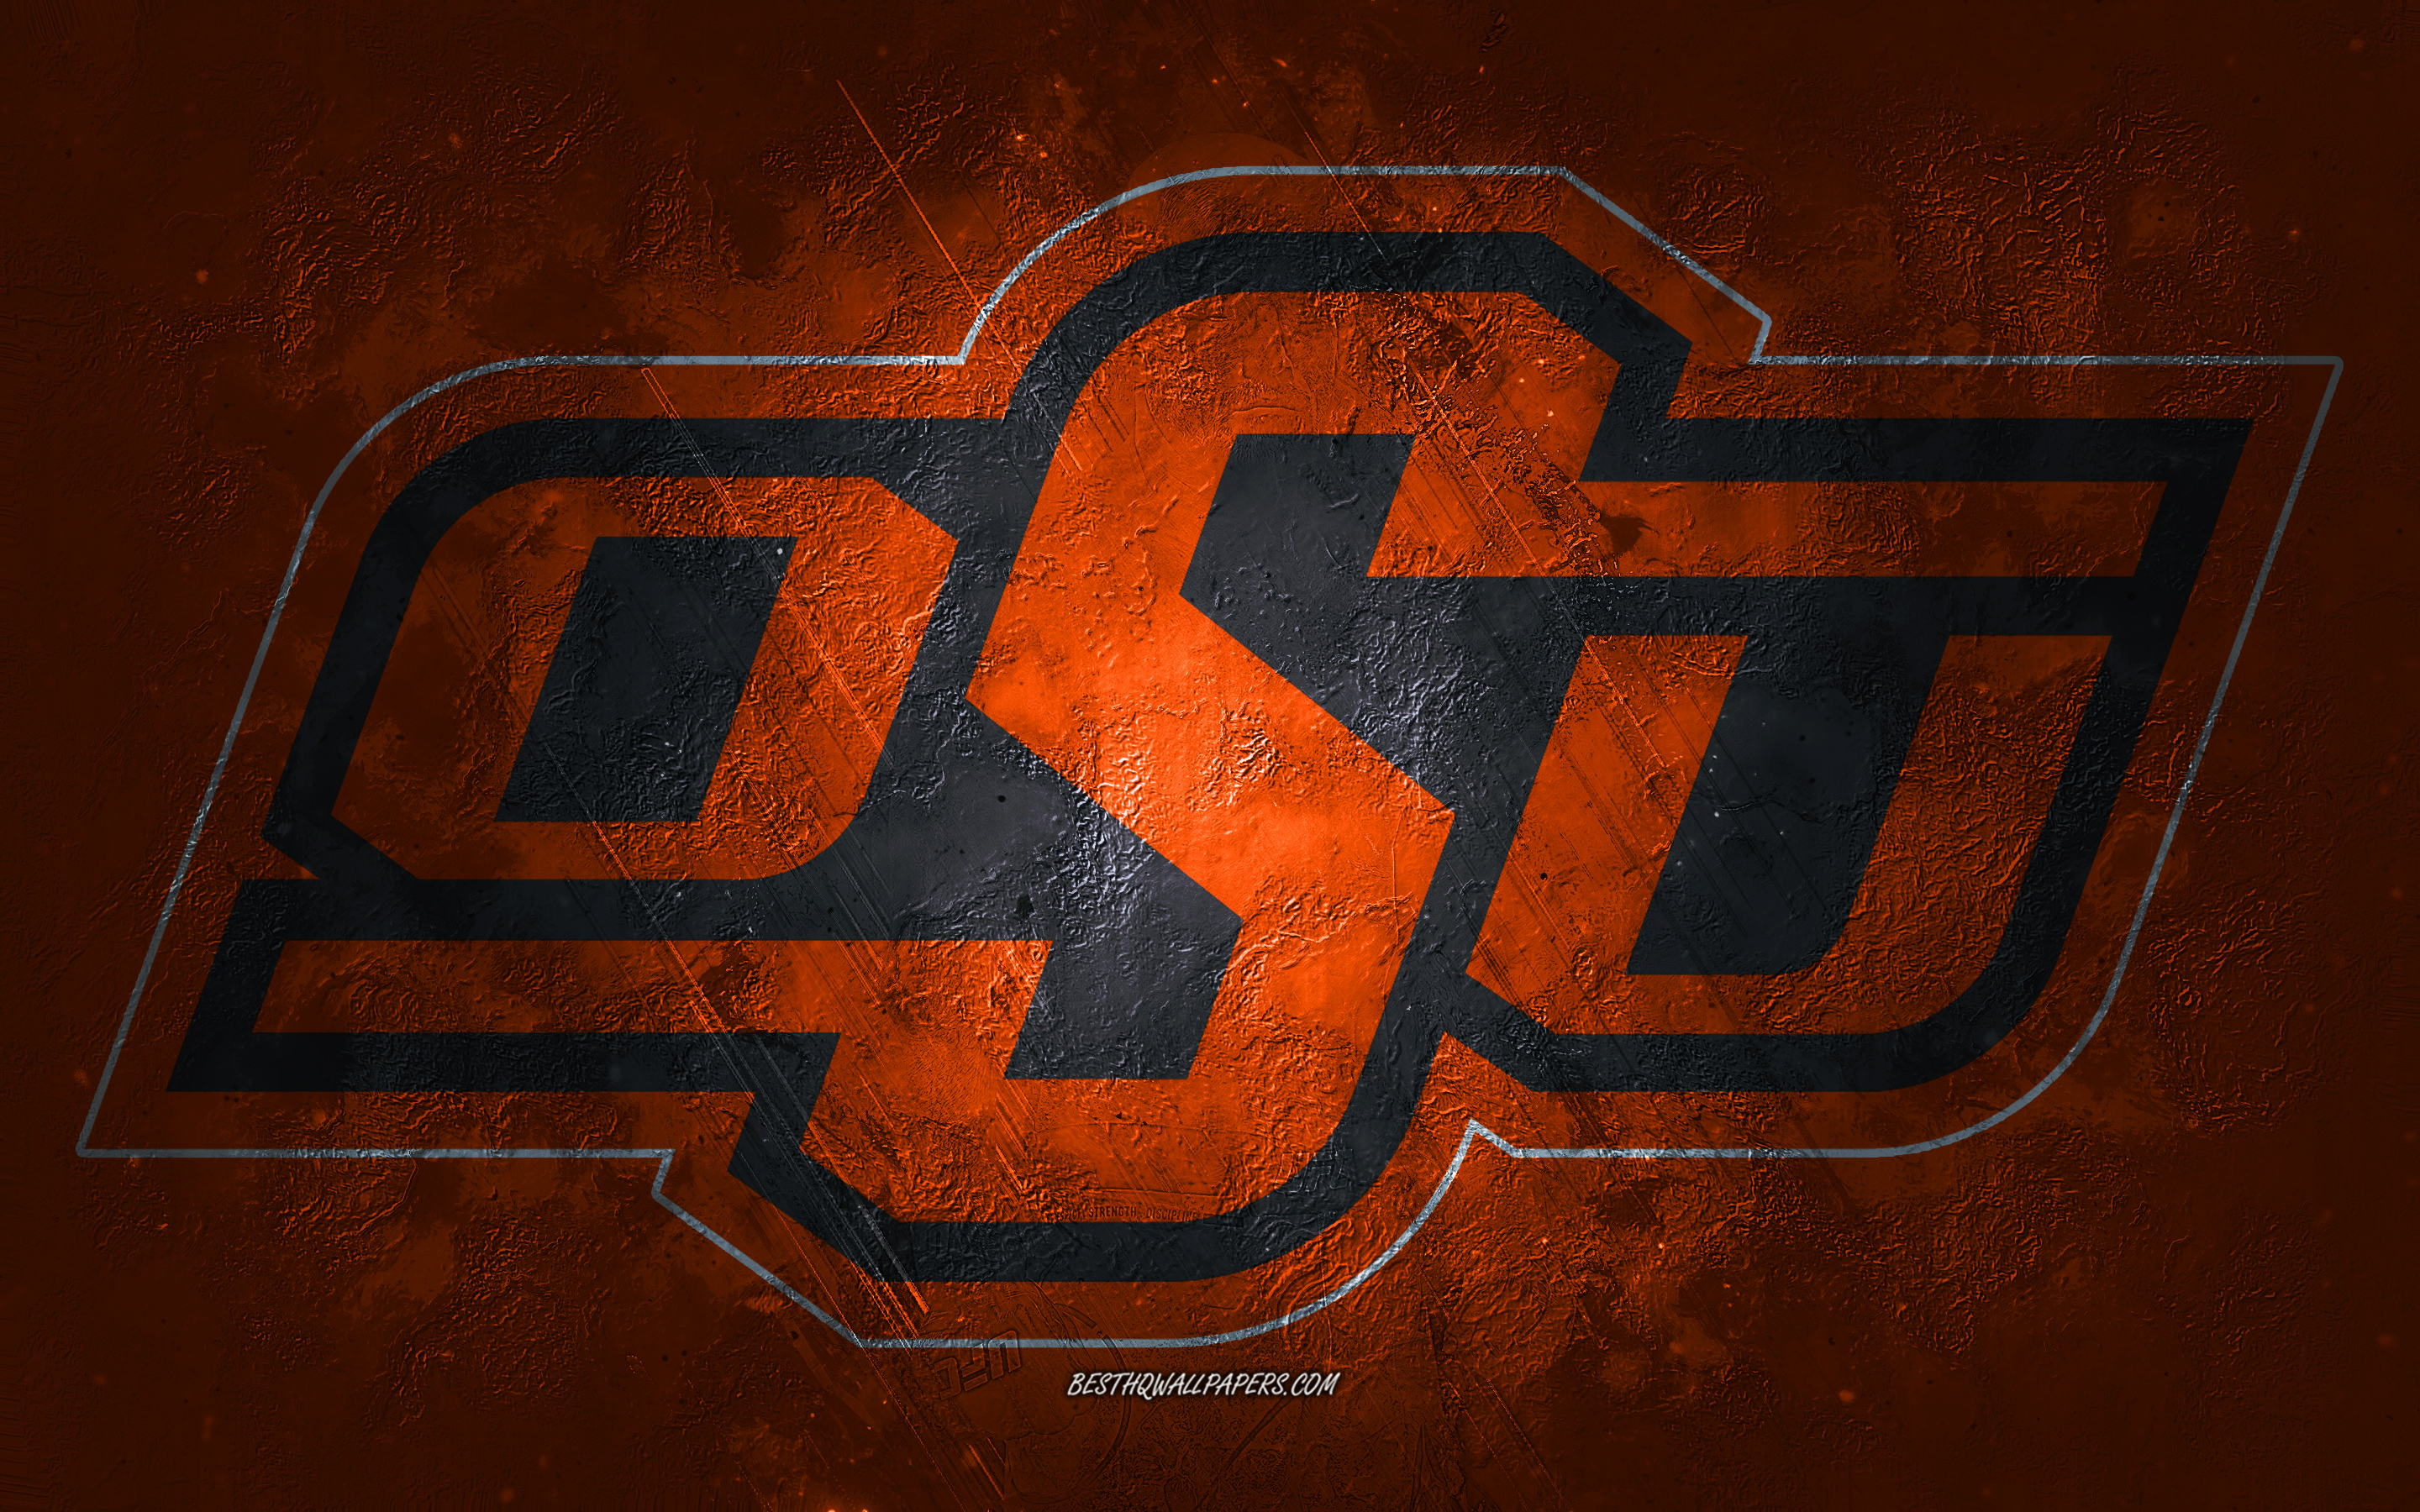 Oklahoma State Wallpapers